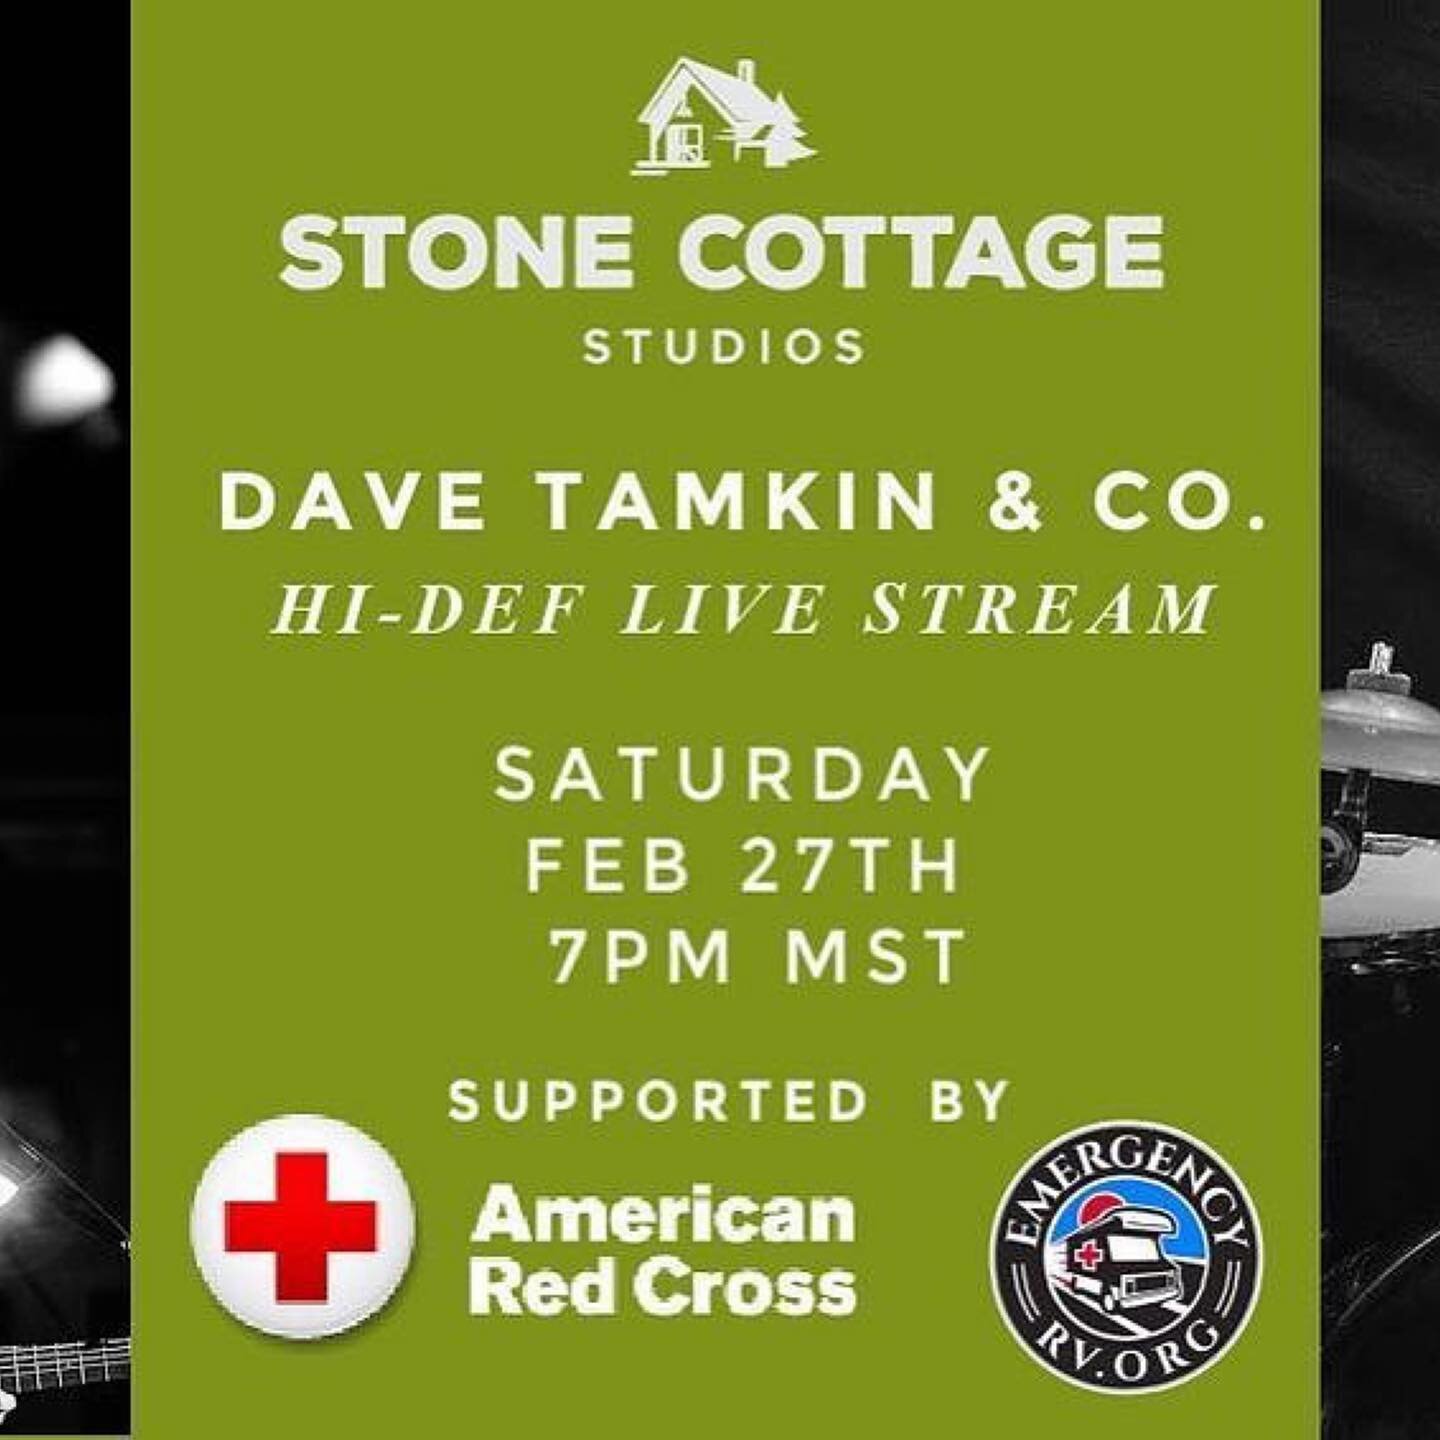 #Repost @coloradoteardrops
・・・
Join us for live music TONIGHT!

@davetamkin The band and I and @stone_cottage_studios are giving a portion of the proceeds from the #livestream on SAT, FEB 27th to @americanredcross #colorado &amp; @emergencyrv to help